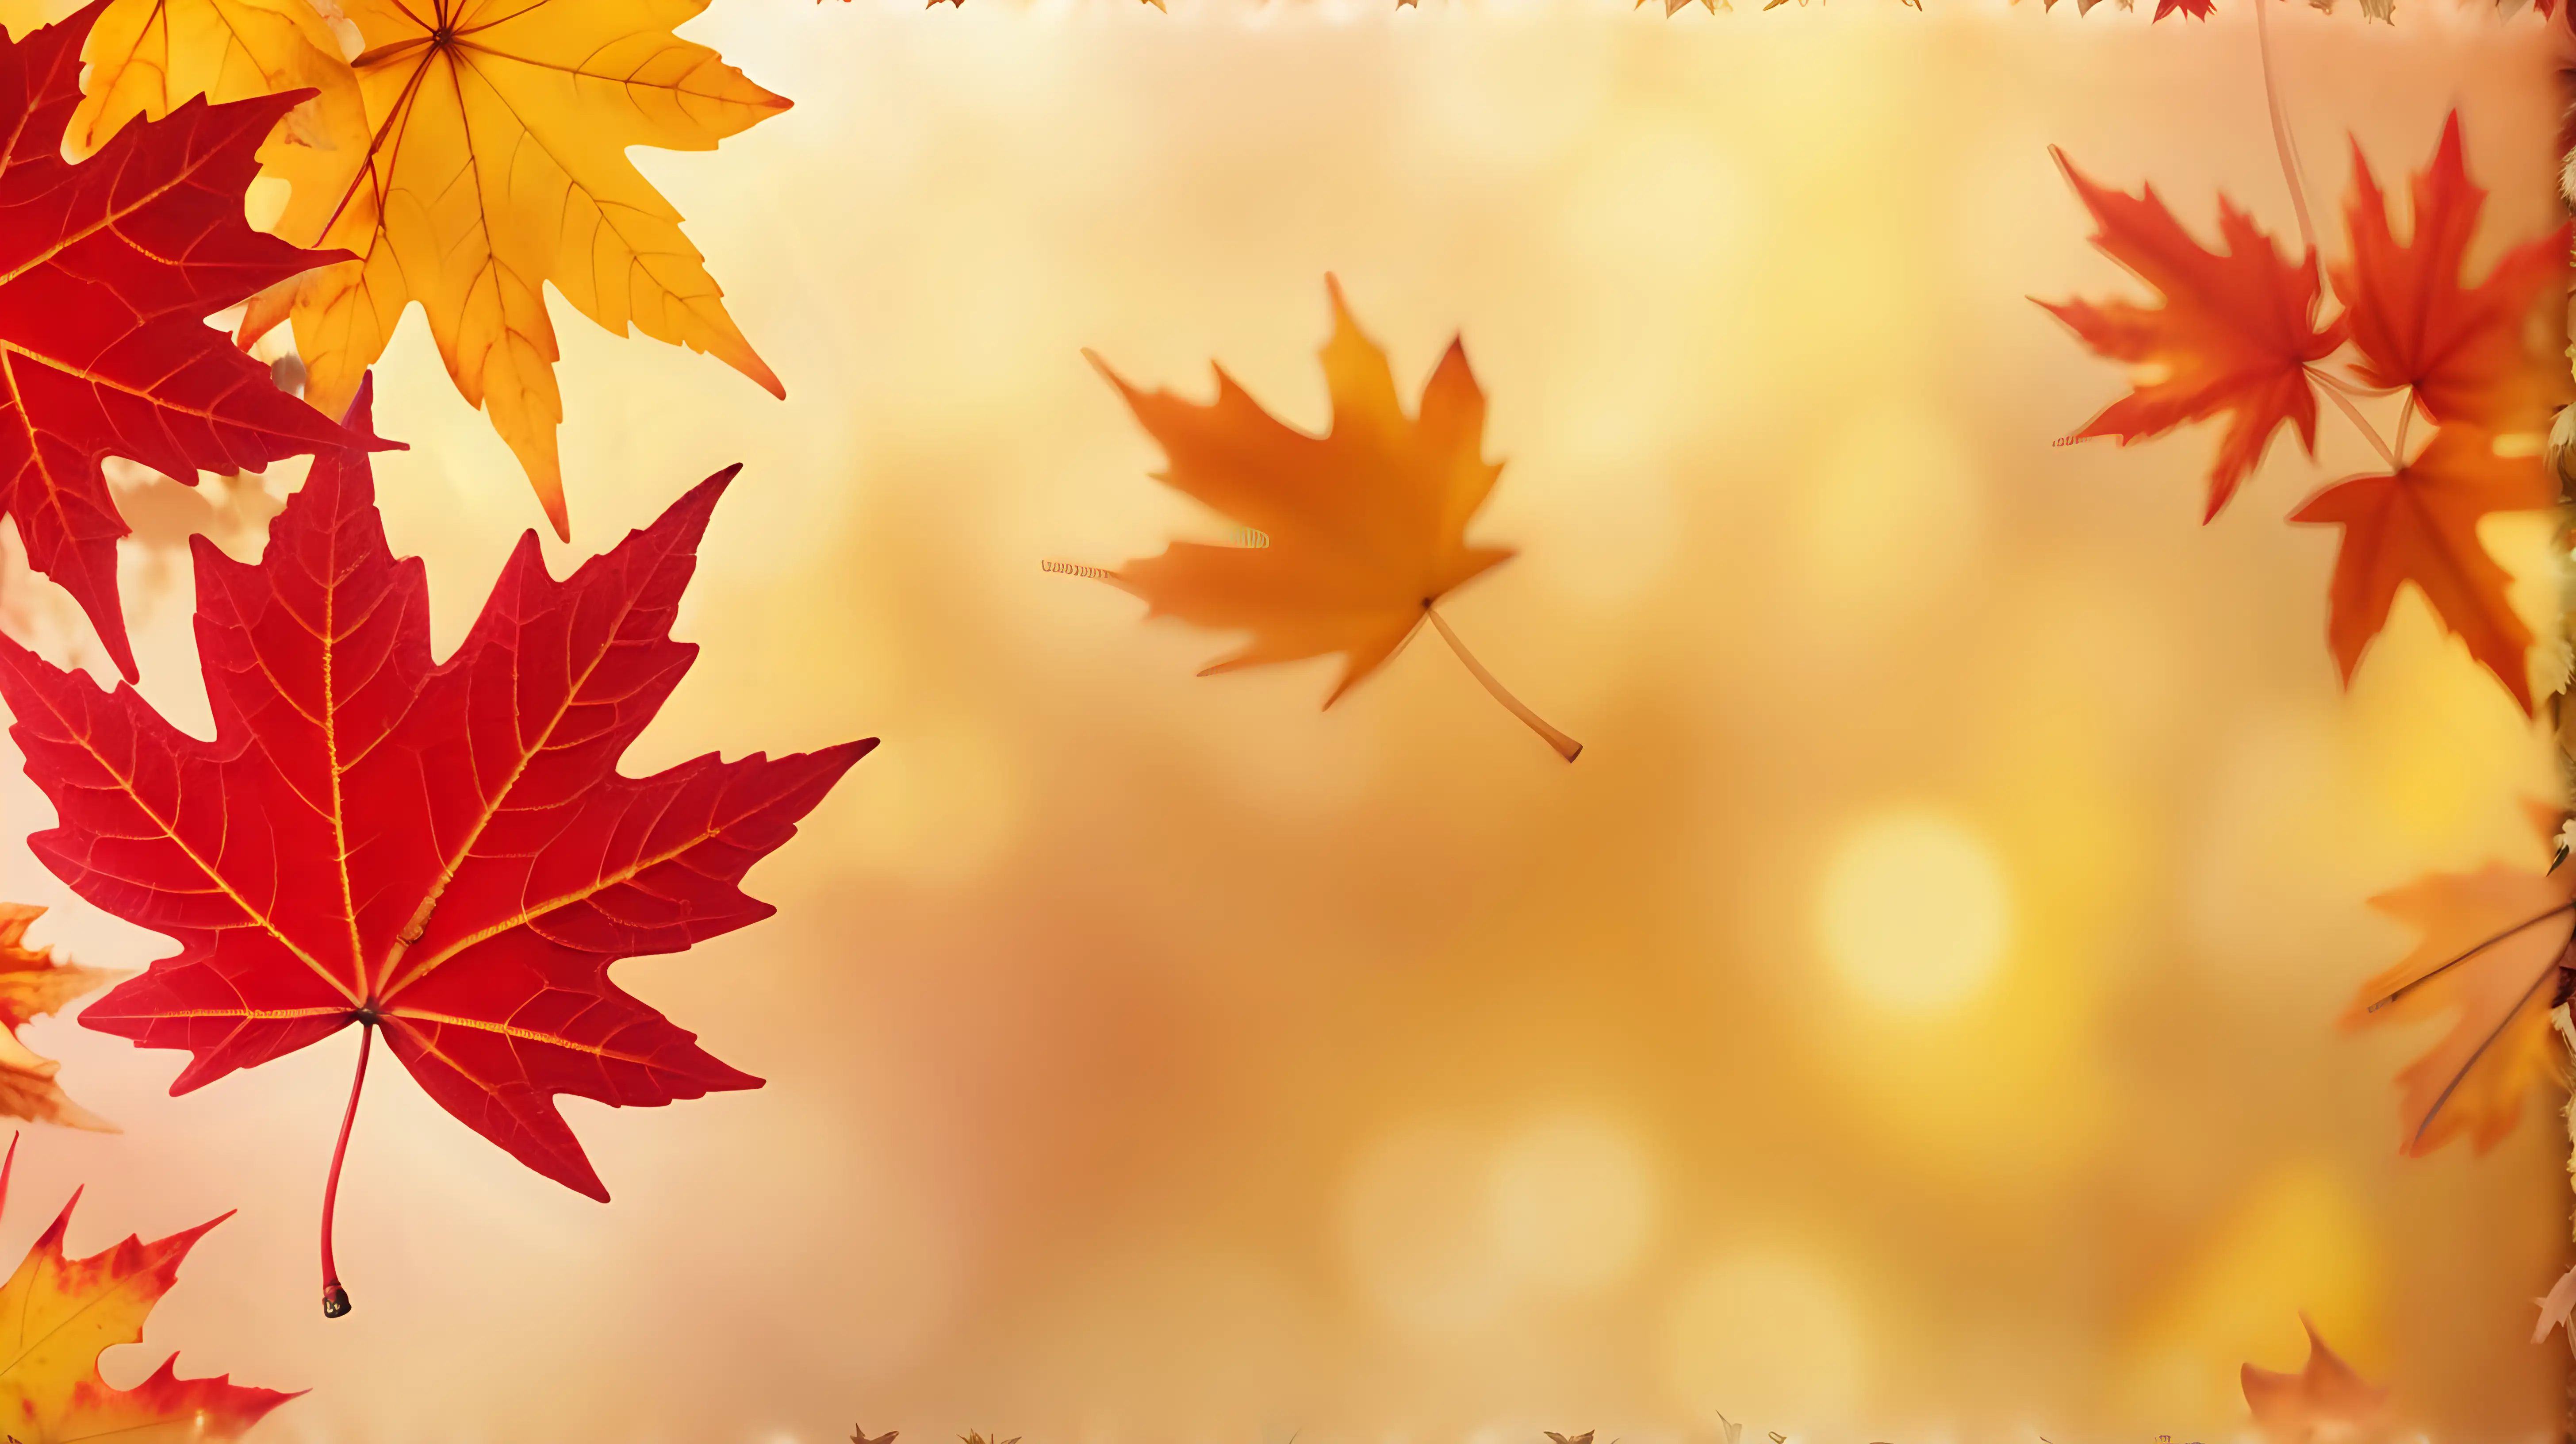 Farewell to Fall Festivities: Create a captivating web banner that symbolizes the end of fall festivities using red and yellow maple leaves in soft focus, promoting the last events and offers of the year.